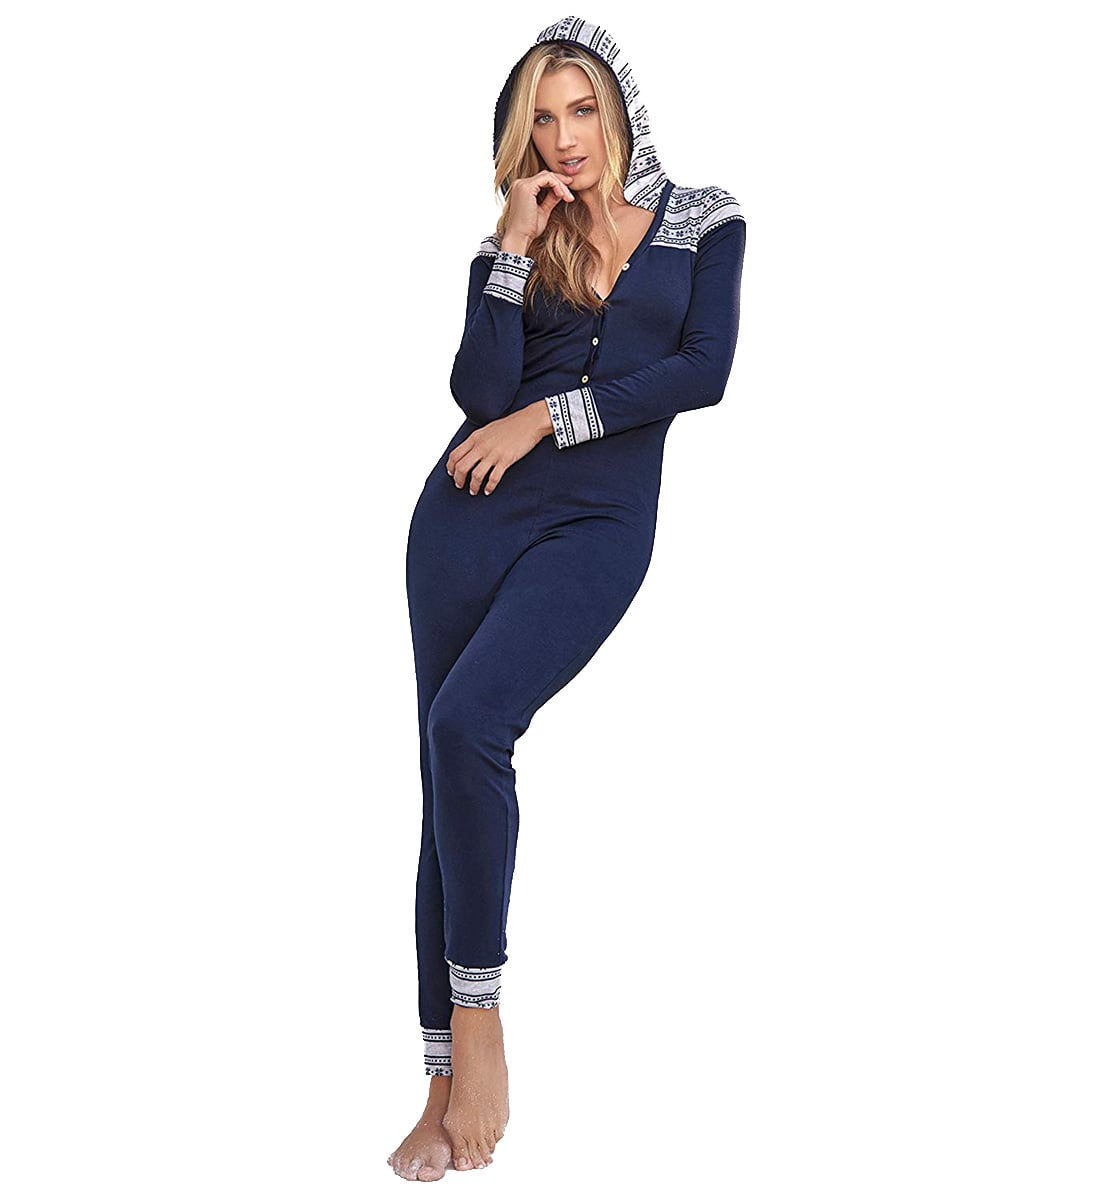 Mapale Long Sleeve Sleep Suit with Hoodie (7286),Small,Blue - Blue,Small